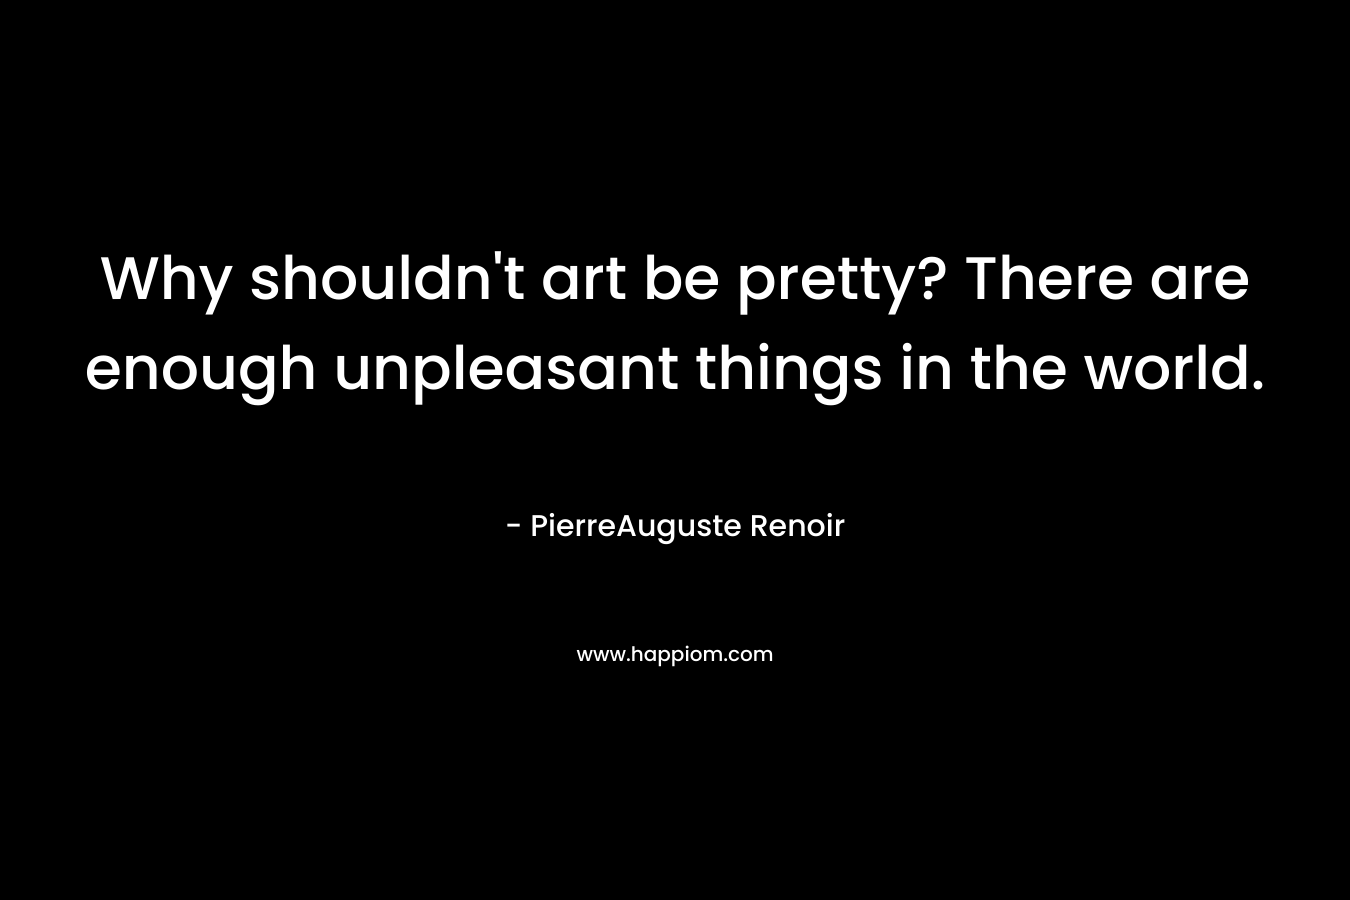 Why shouldn't art be pretty? There are enough unpleasant things in the world.